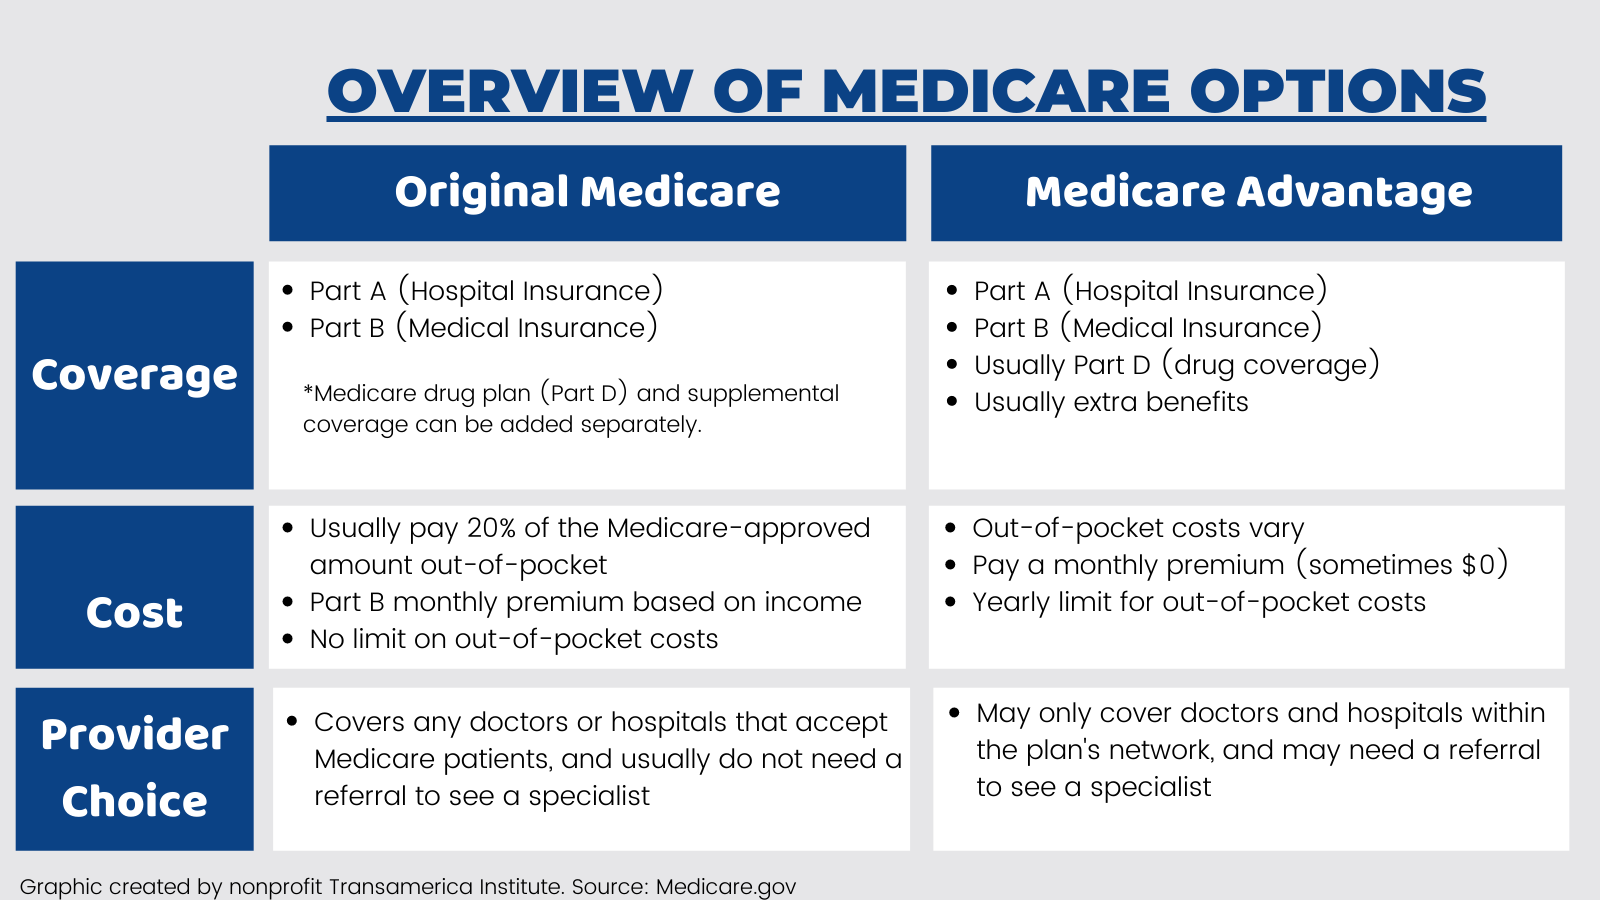 Overview of Medicare Options